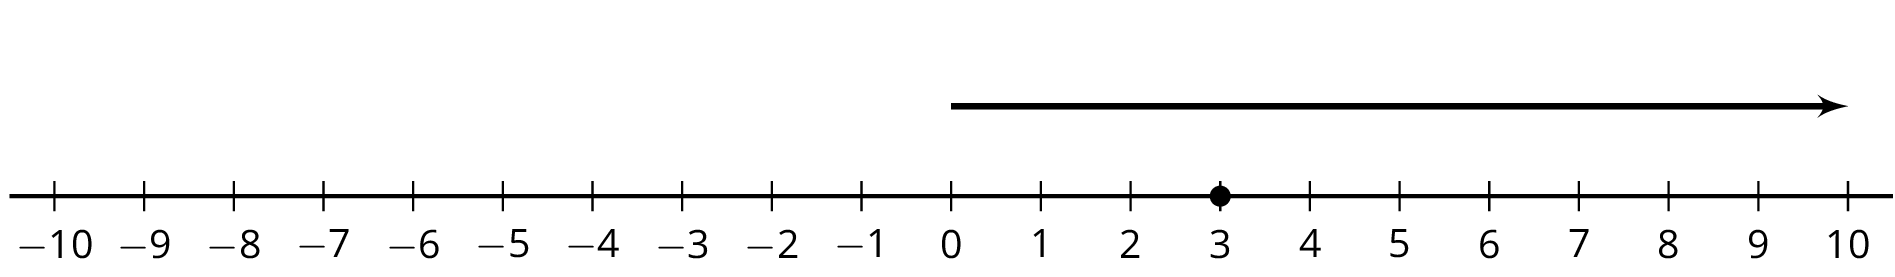 A number line with the numbers negative 10 through 10 indicated. An arrow starts at 0, points to the right, and ends at 10. A solid dot is indicated at 3.